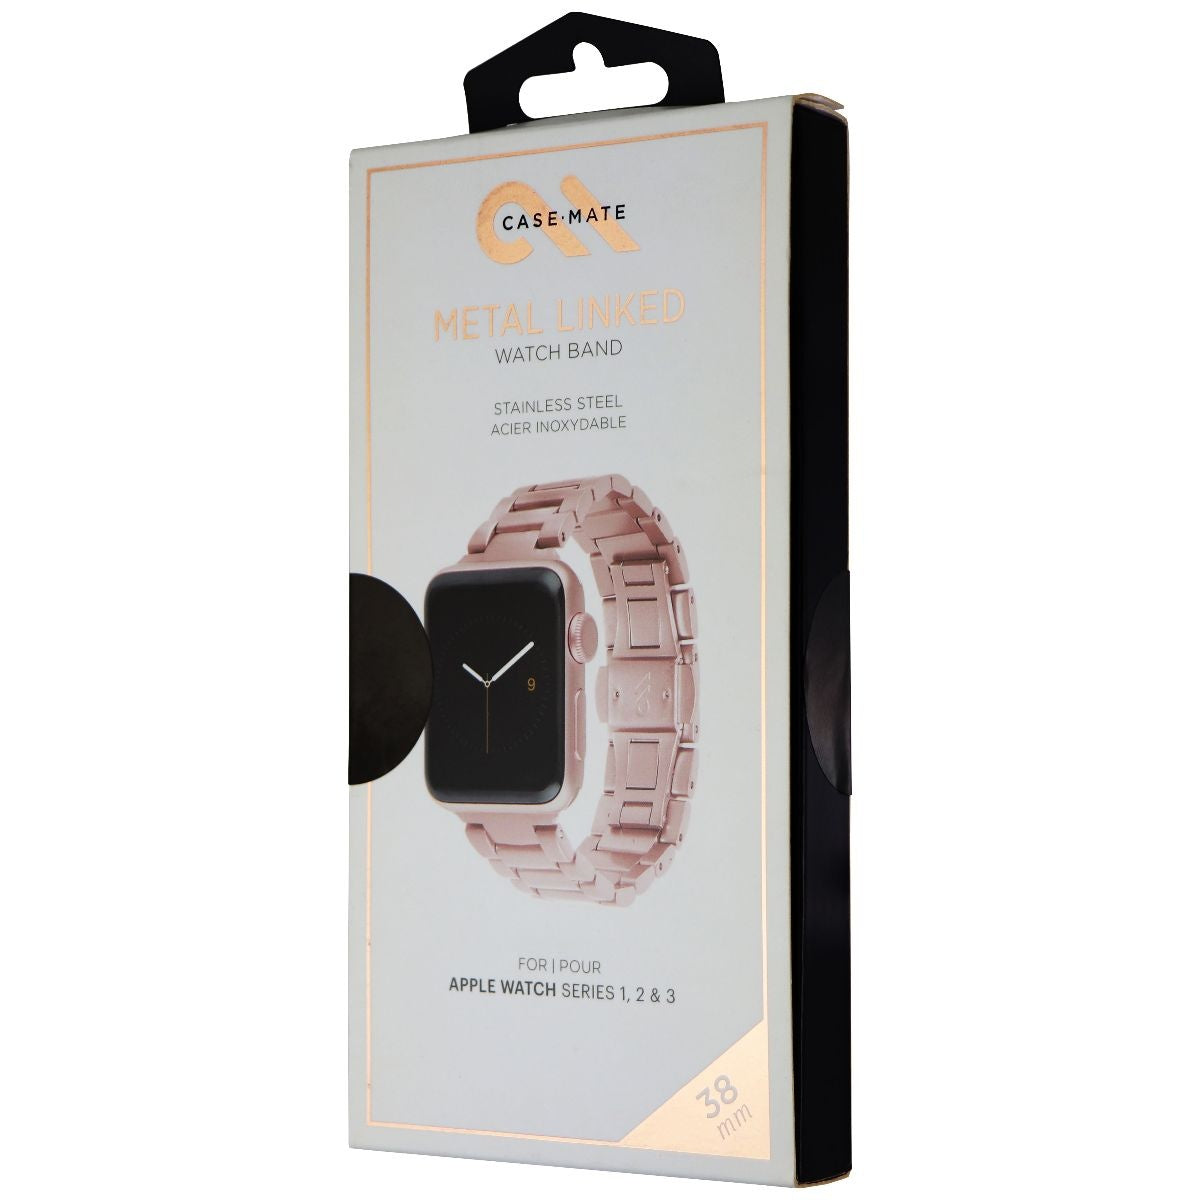 Case-Mate 38mm Metal Link Band for Apple Watch 38mm/40mm All Series - Rose Gold Smart Watch Accessories - Watch Bands Case-Mate    - Simple Cell Bulk Wholesale Pricing - USA Seller